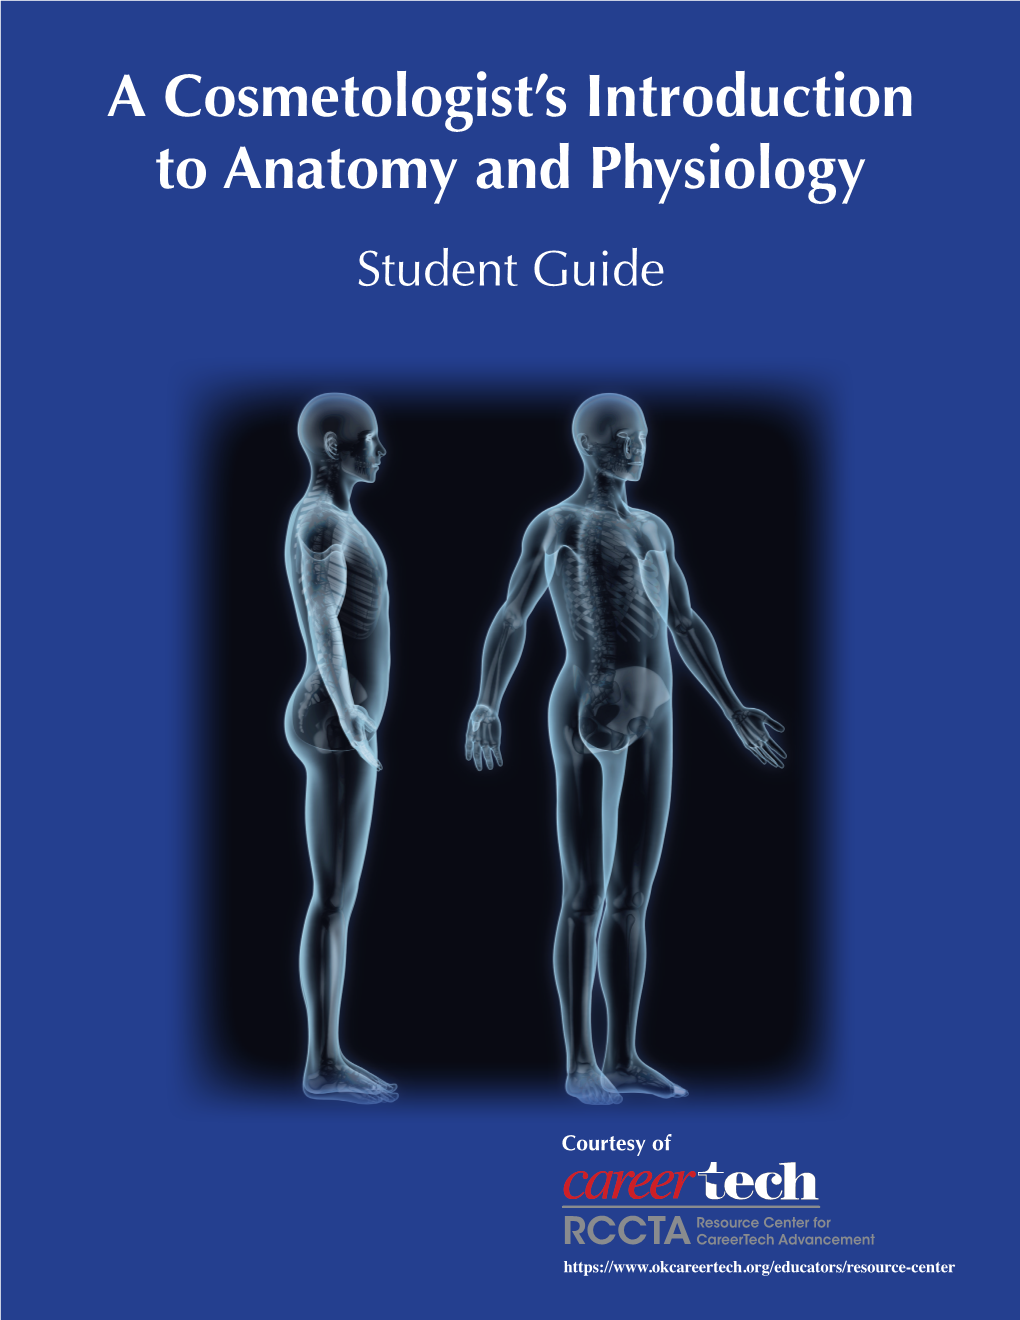 A Cosmetologist's Introduction to Anatomy and Physiology